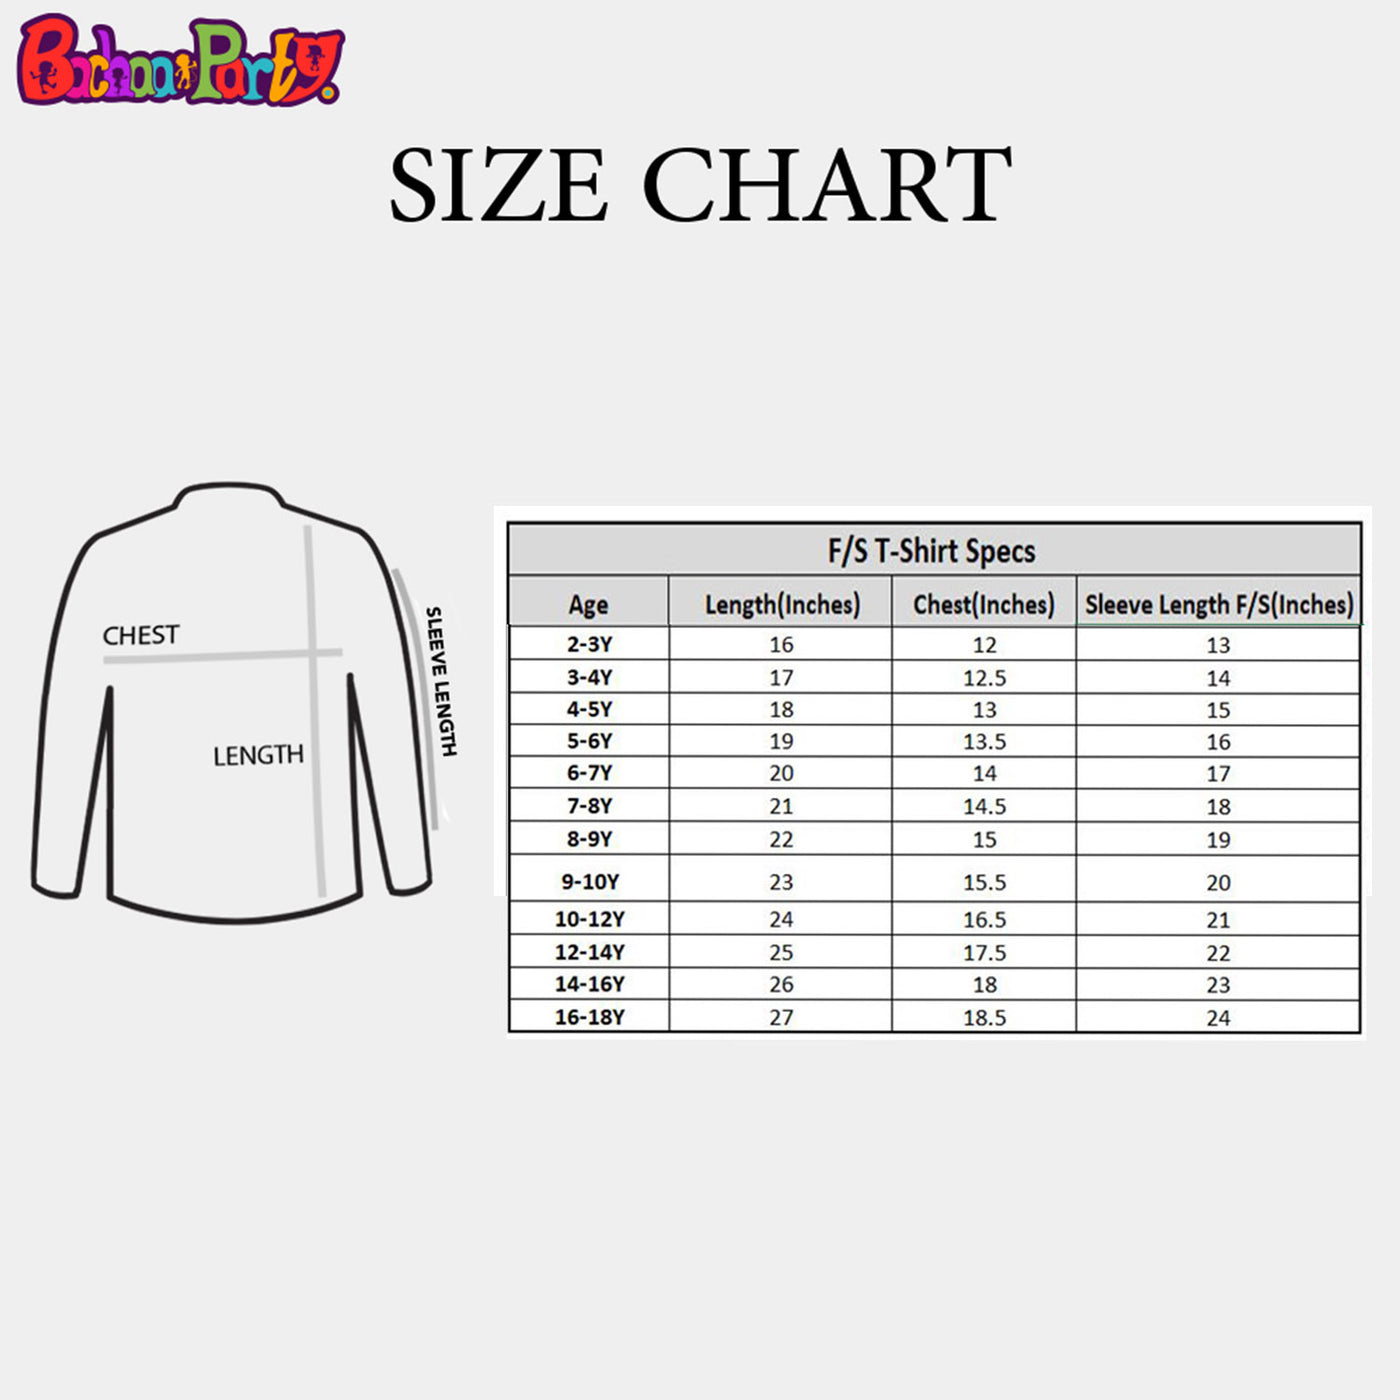 Character T-Shirt For Boys - Charcoal